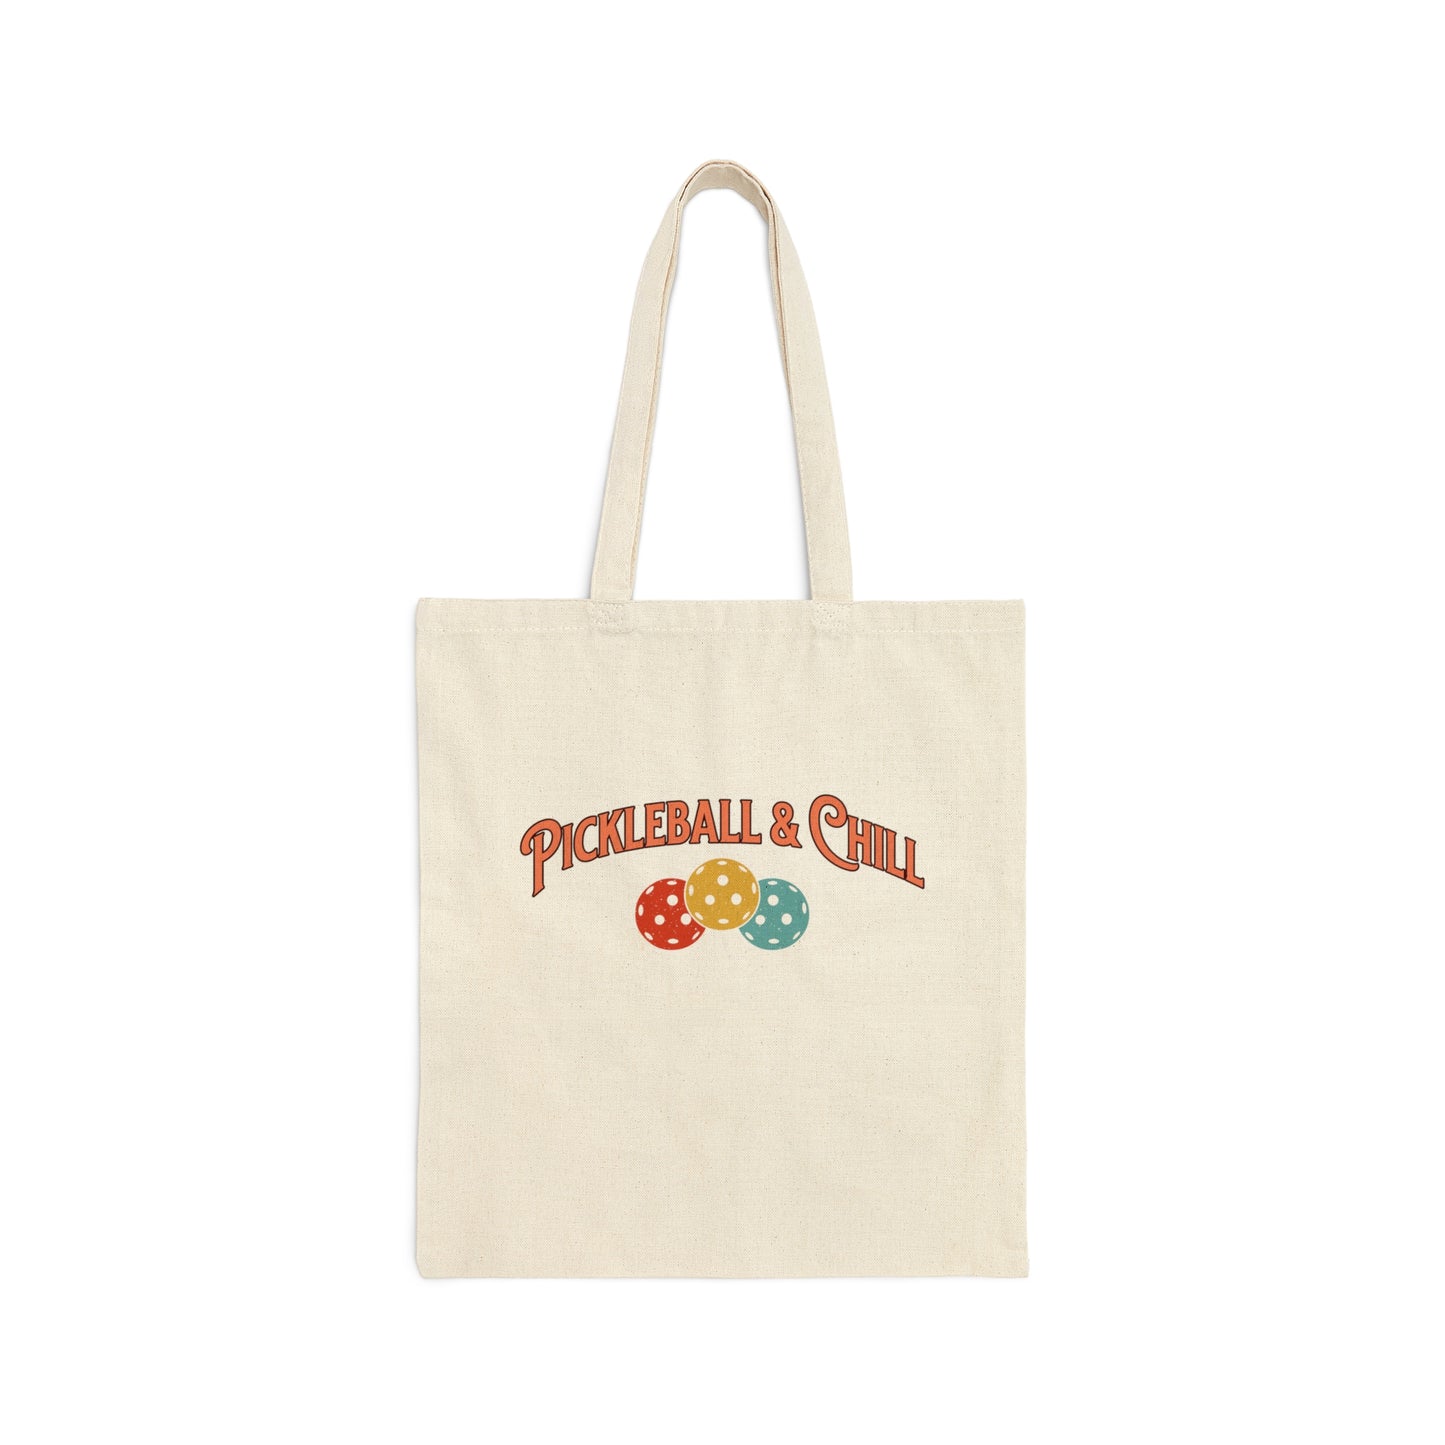 Pickleball & Chill - Tote Bag for Court & Leisure